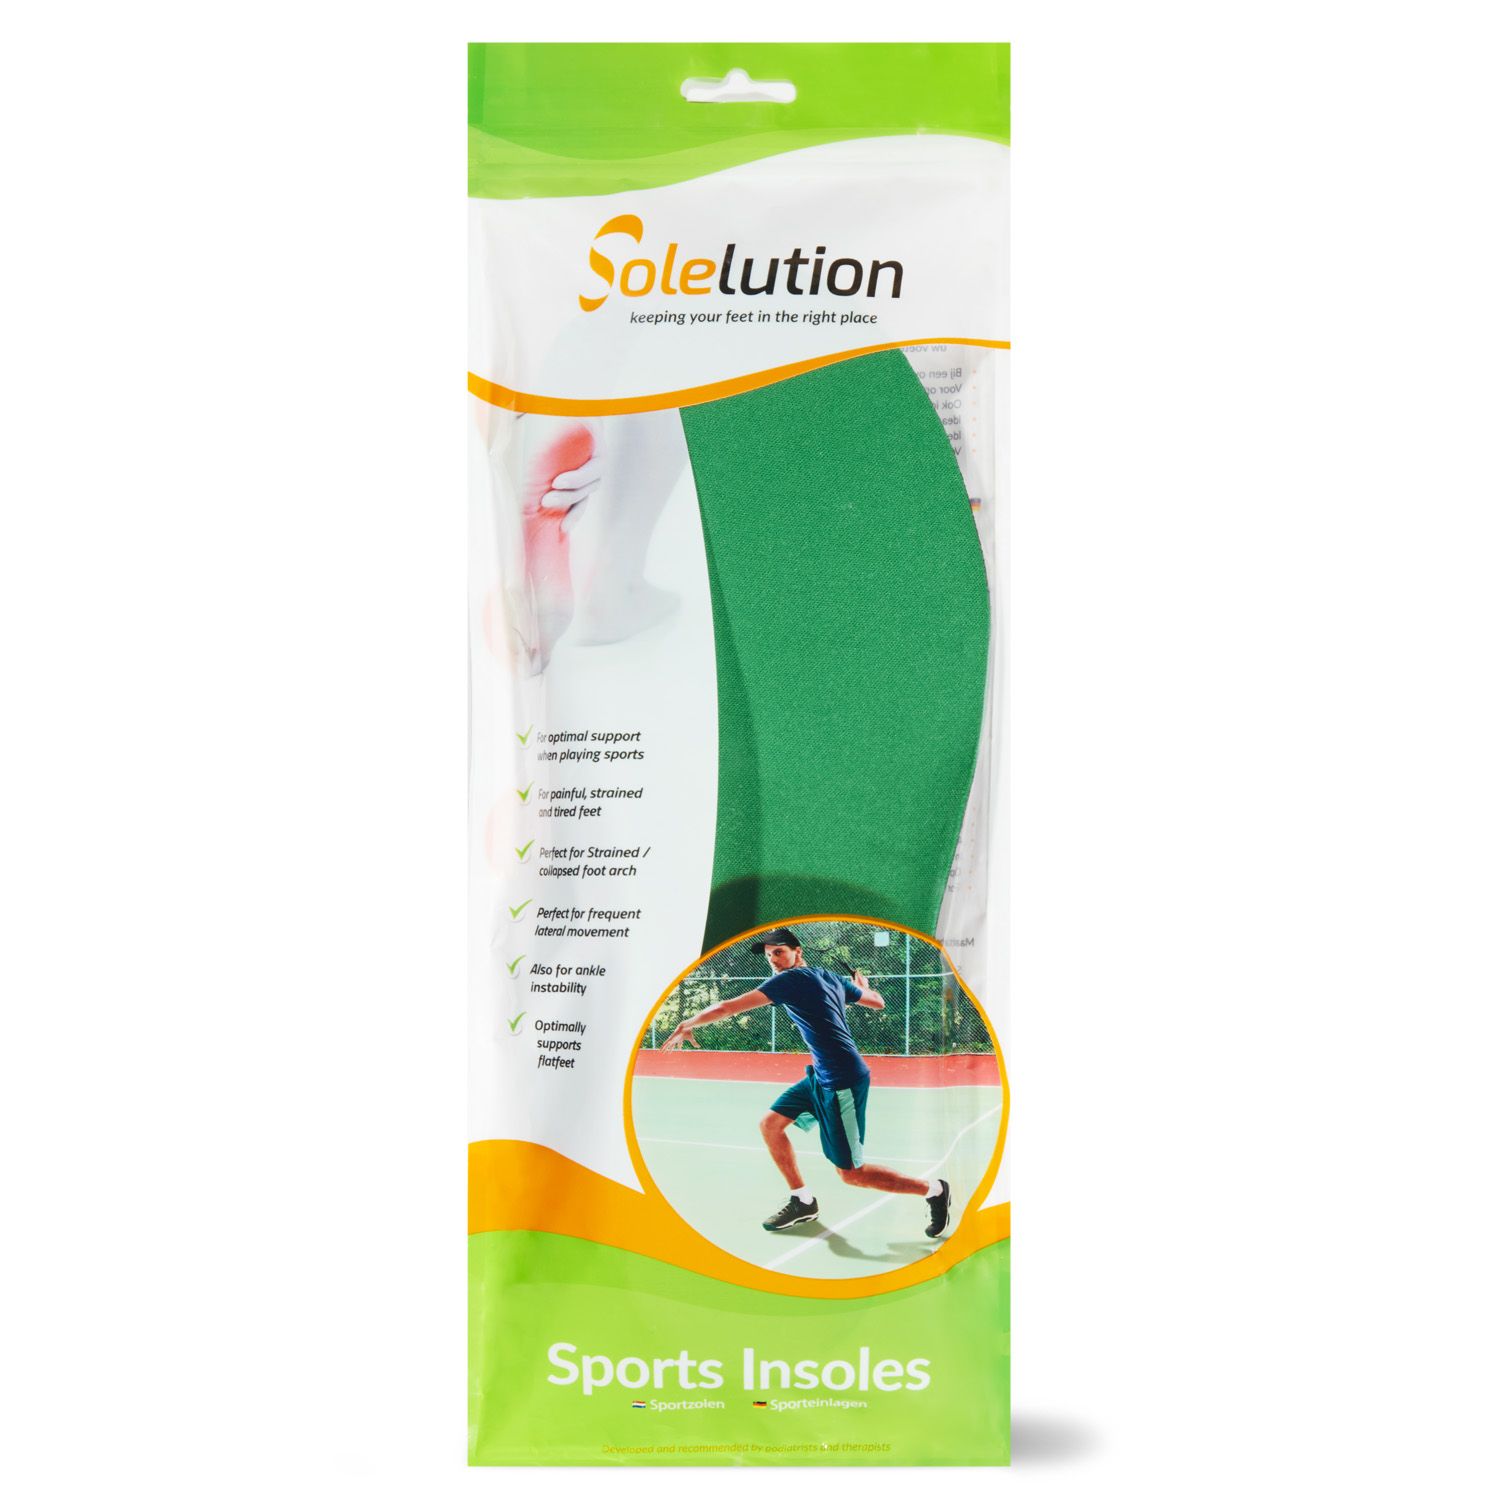 Solelution sports insoles package